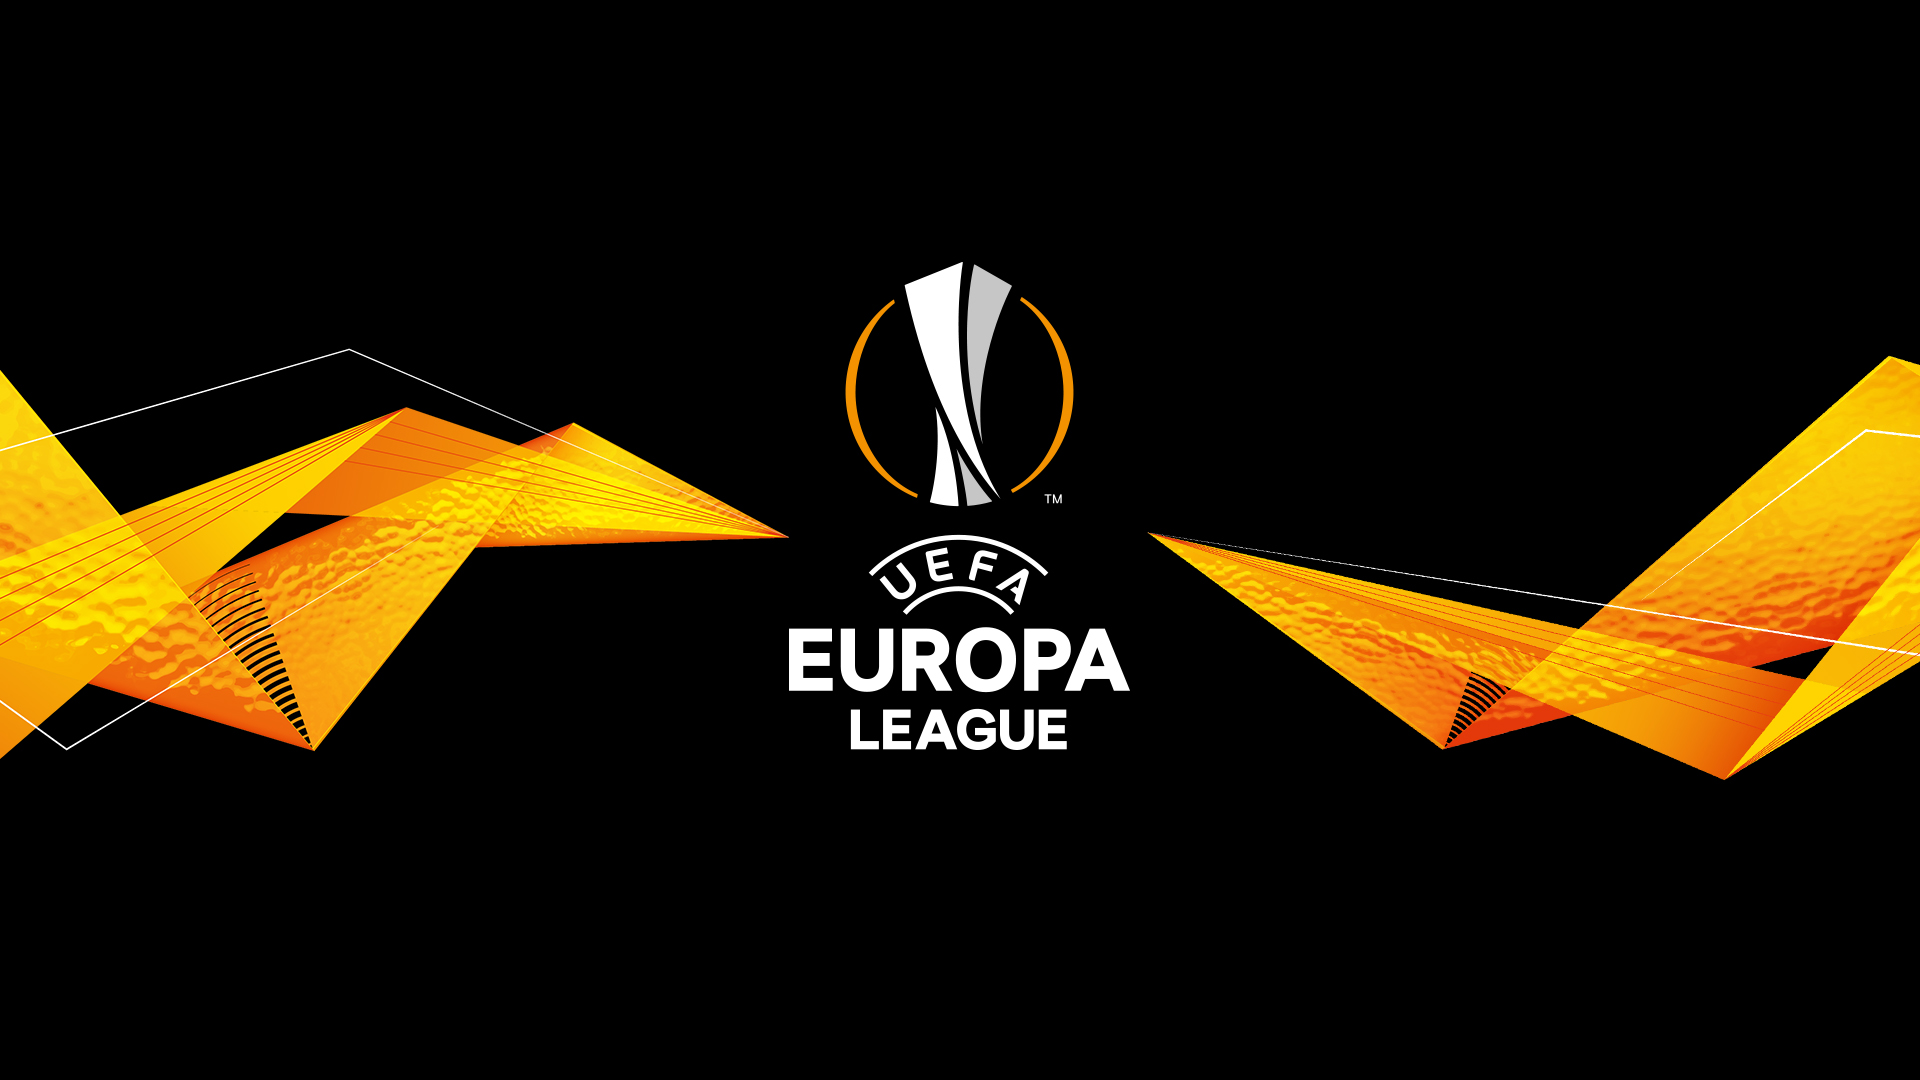 Europa League match-ups catch attention as clubs compete for quarter final slots